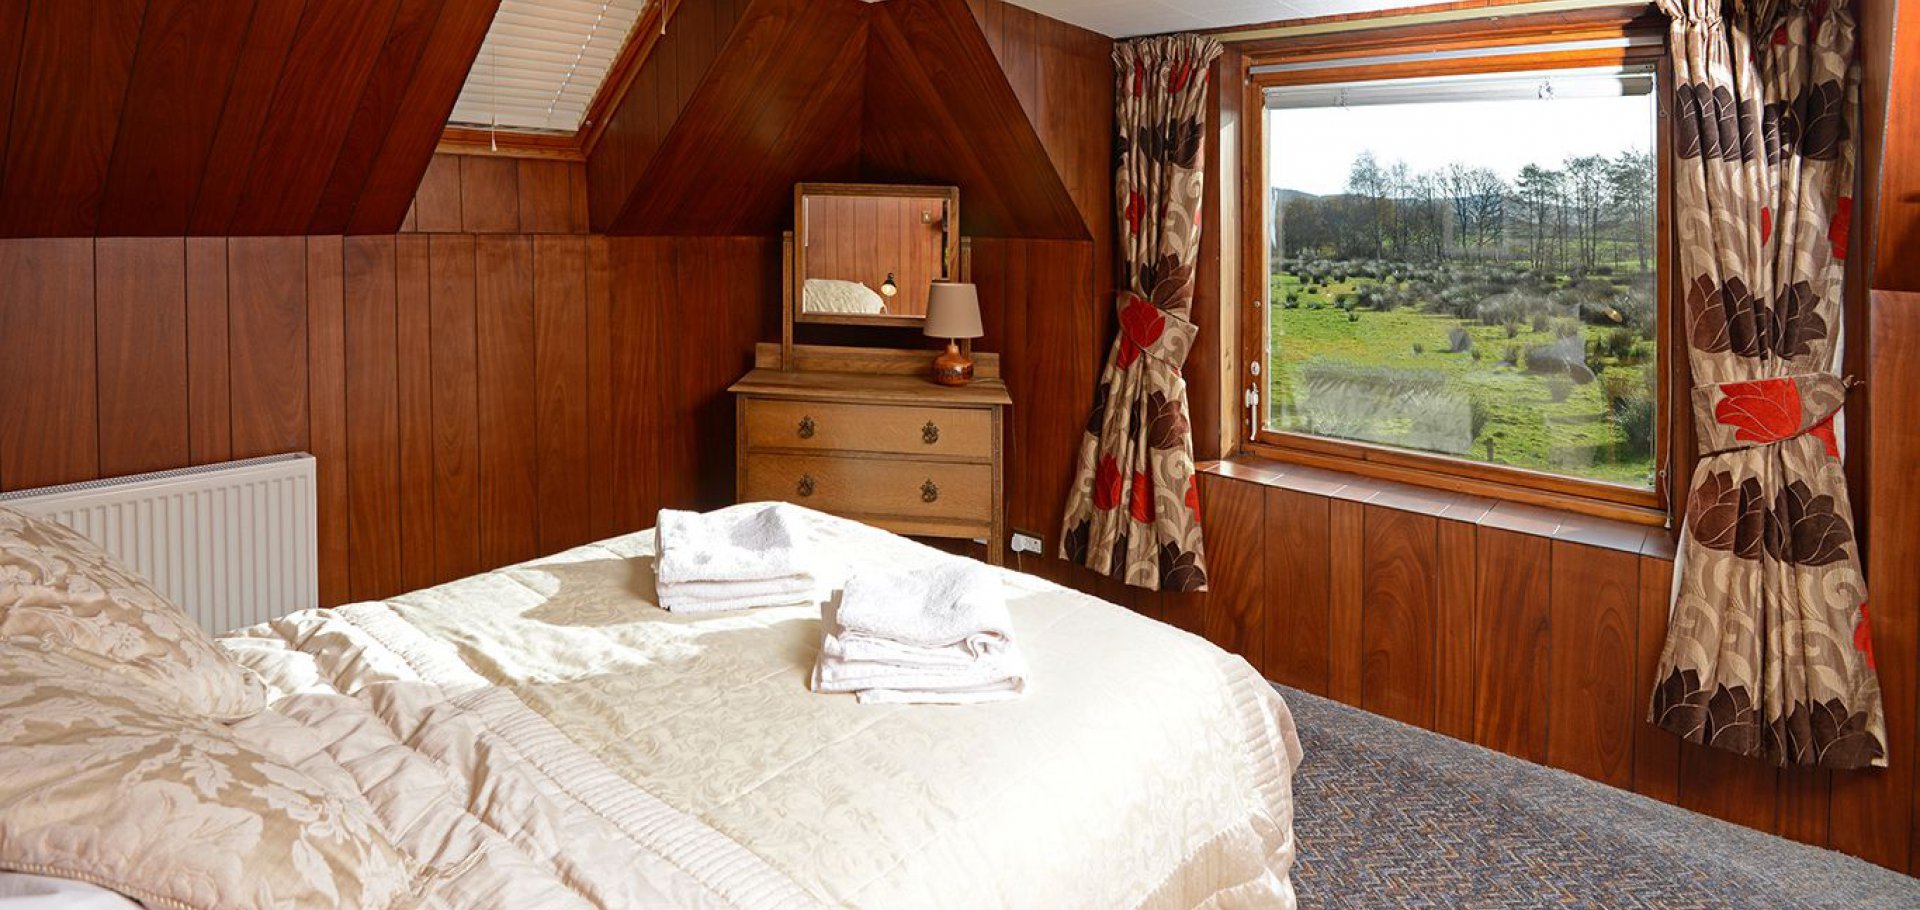 King sized double bedroom at holiday cottage near dalbeattie on the Solway Coast South Scotland